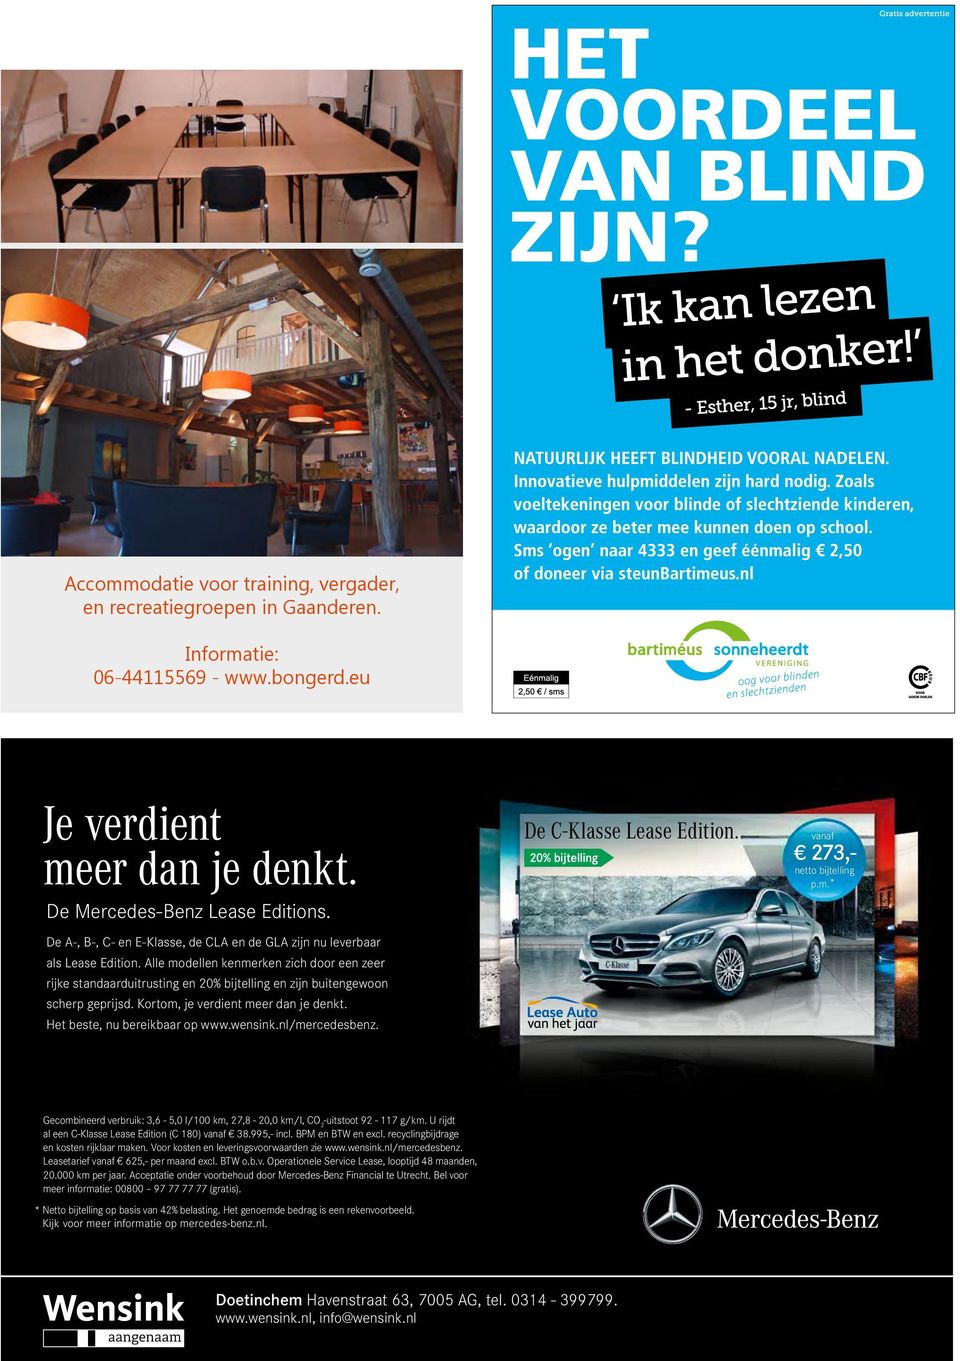 De A-, B-, C- en E-Klasse, de CLA en de GLA zijn nu leverbaar als Lease Edition.